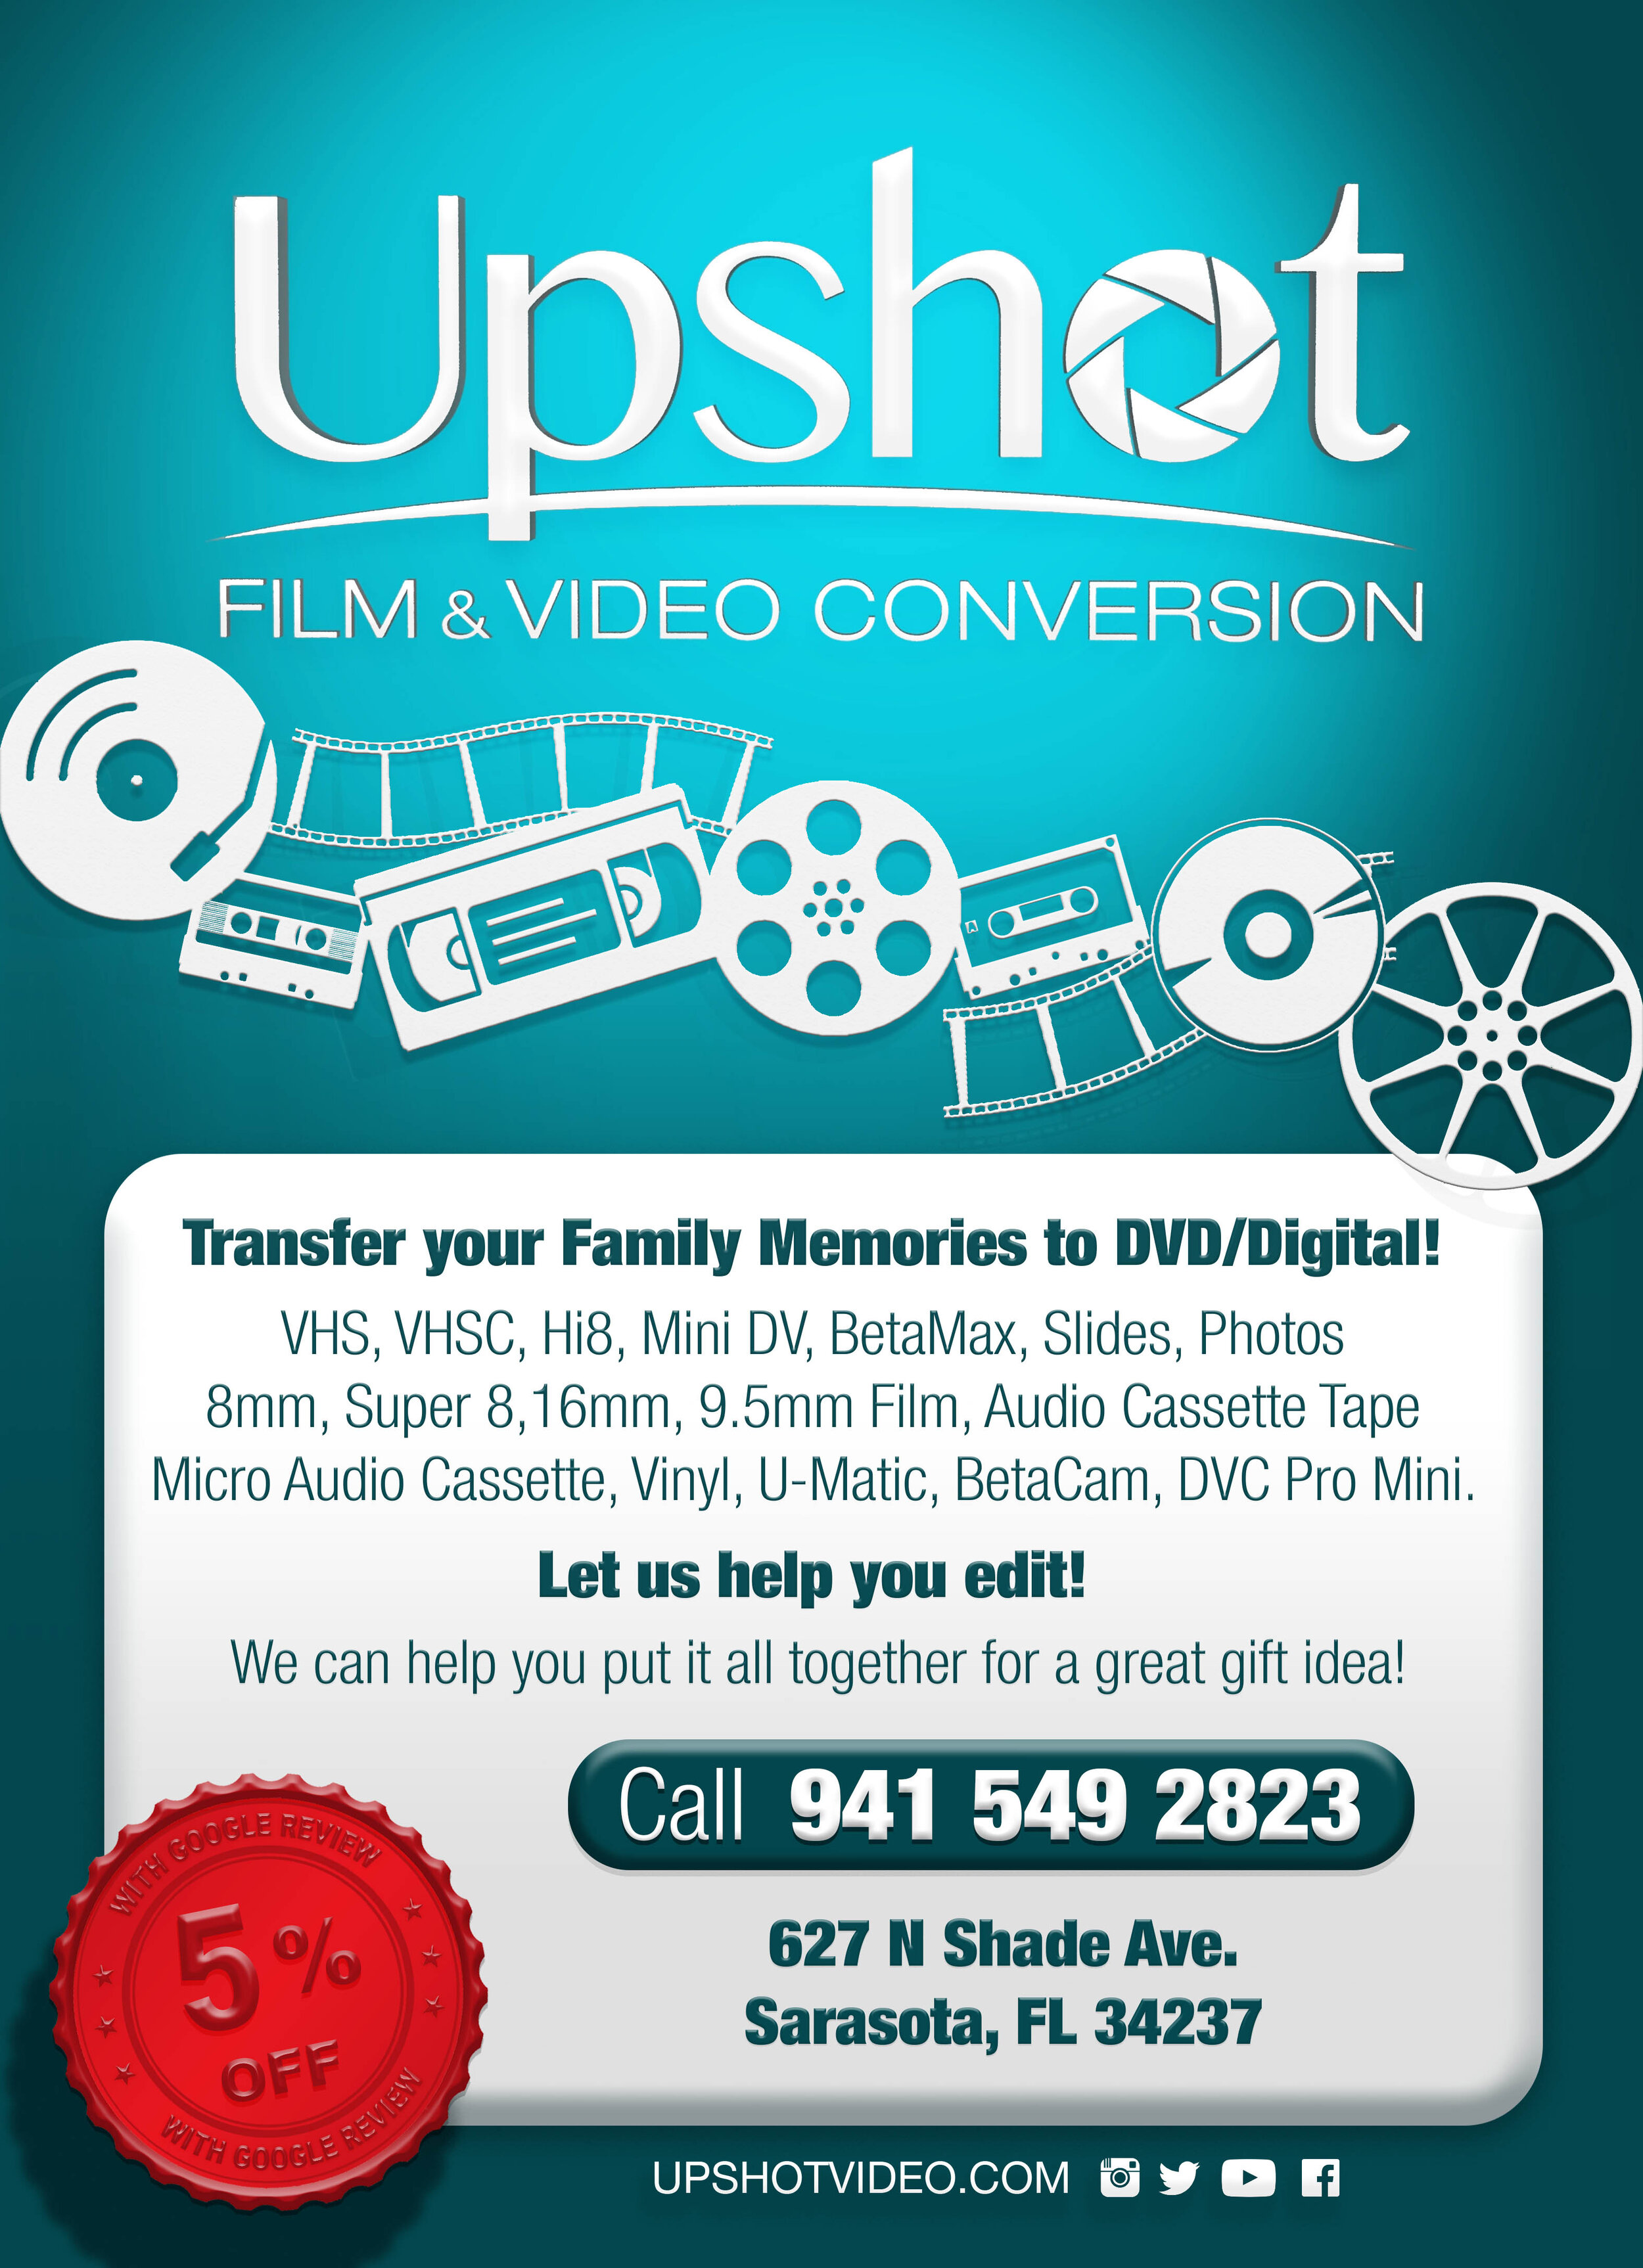 Upshot Video Productions Vhs To Dvd In House Video Transfer Service Based In Sarasota Fl Also Super 8 To Dvd 8mm To Dvd Hi8 To Dvd Mini Dv To Dvd